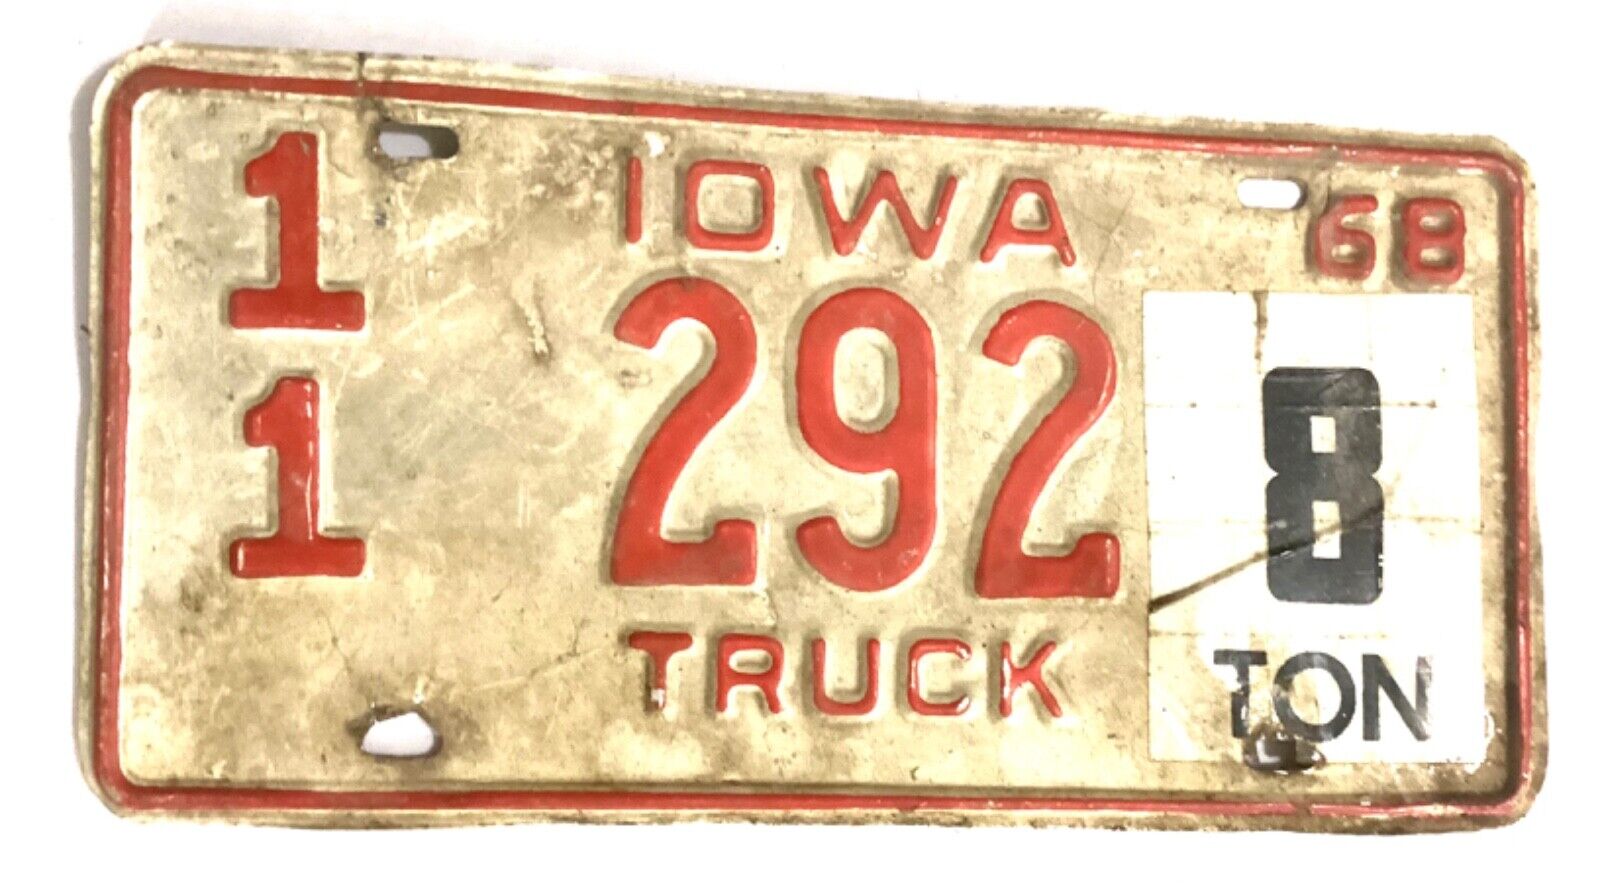 1968 Iowa License Plate Low Number 8 Ton Truck Vintage Antique Historical USA